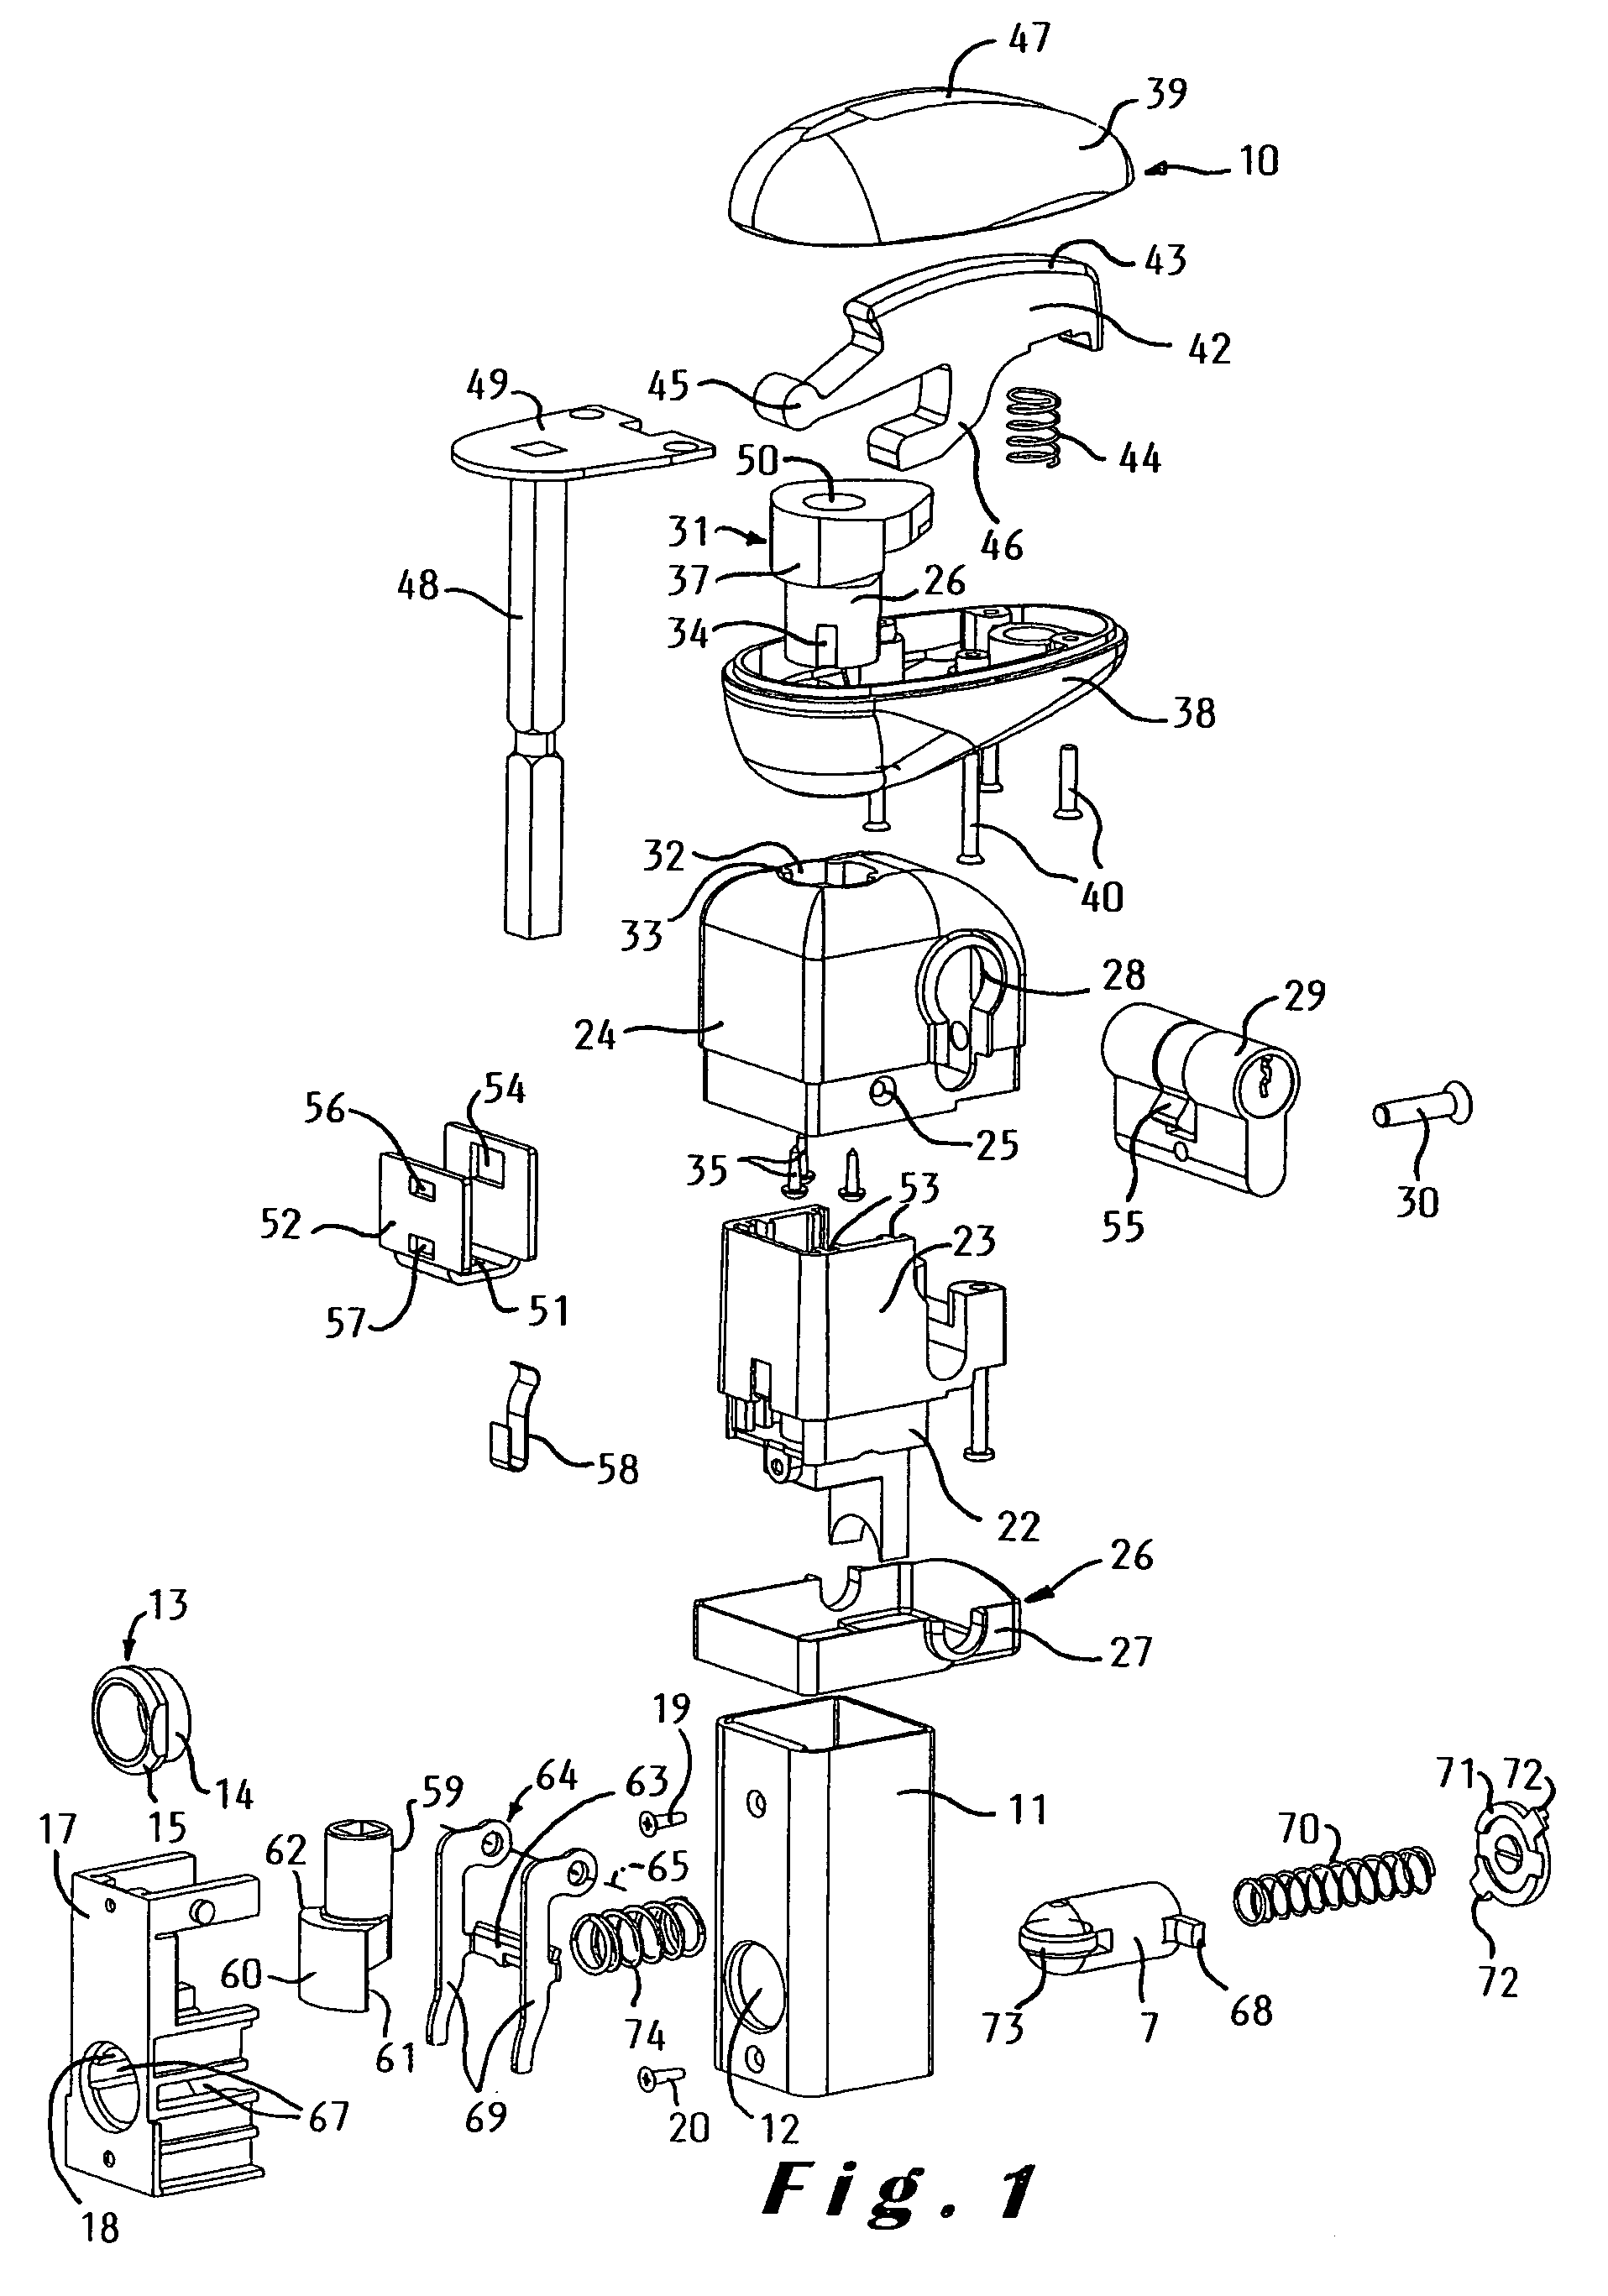 Self-latching device for fastening a hinged closure member